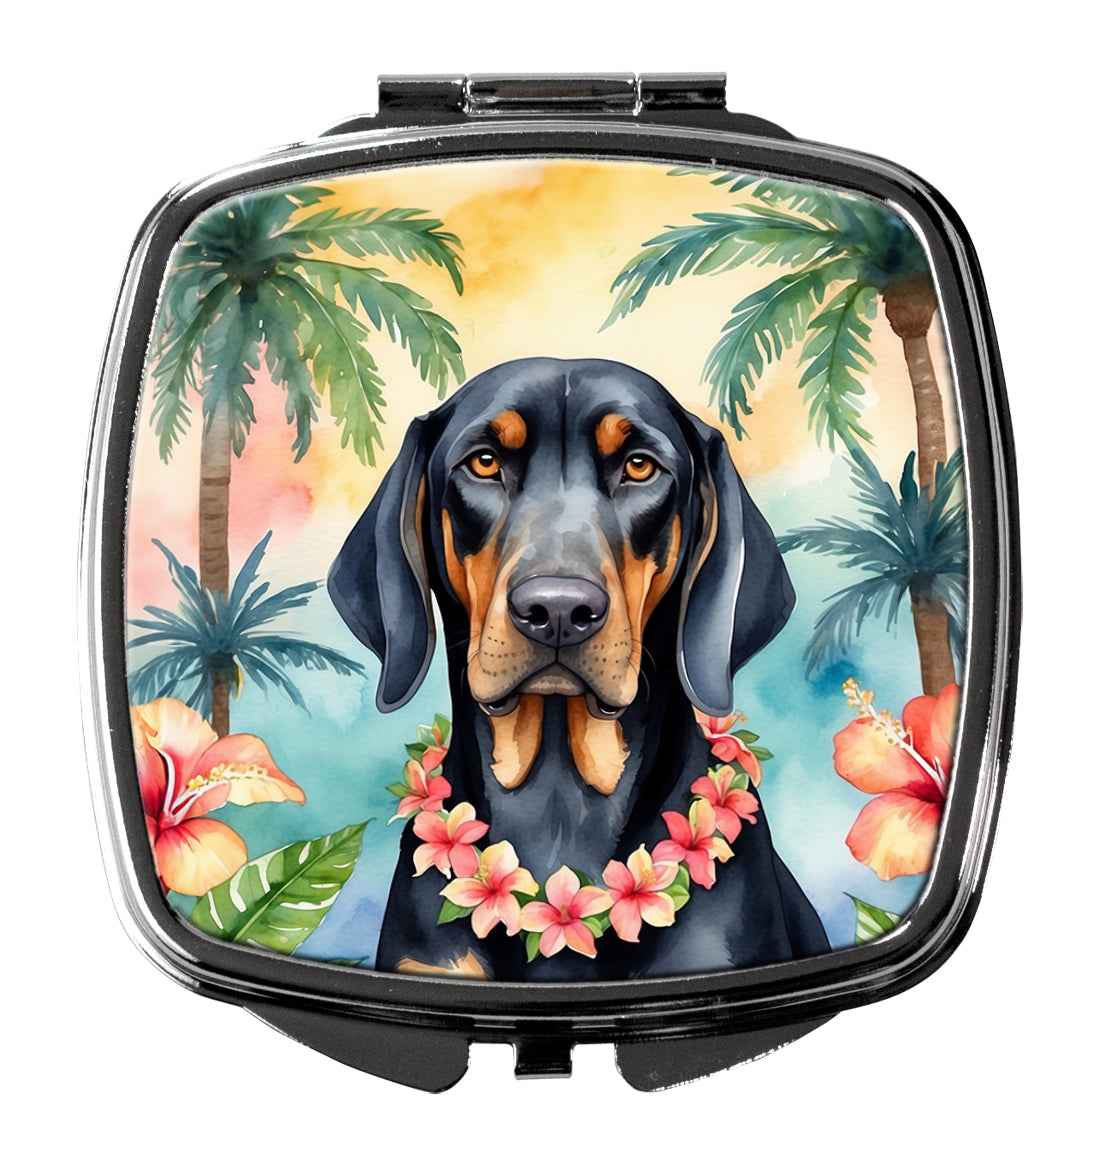 Buy this Black and Tan Coonhound Luau Compact Mirror